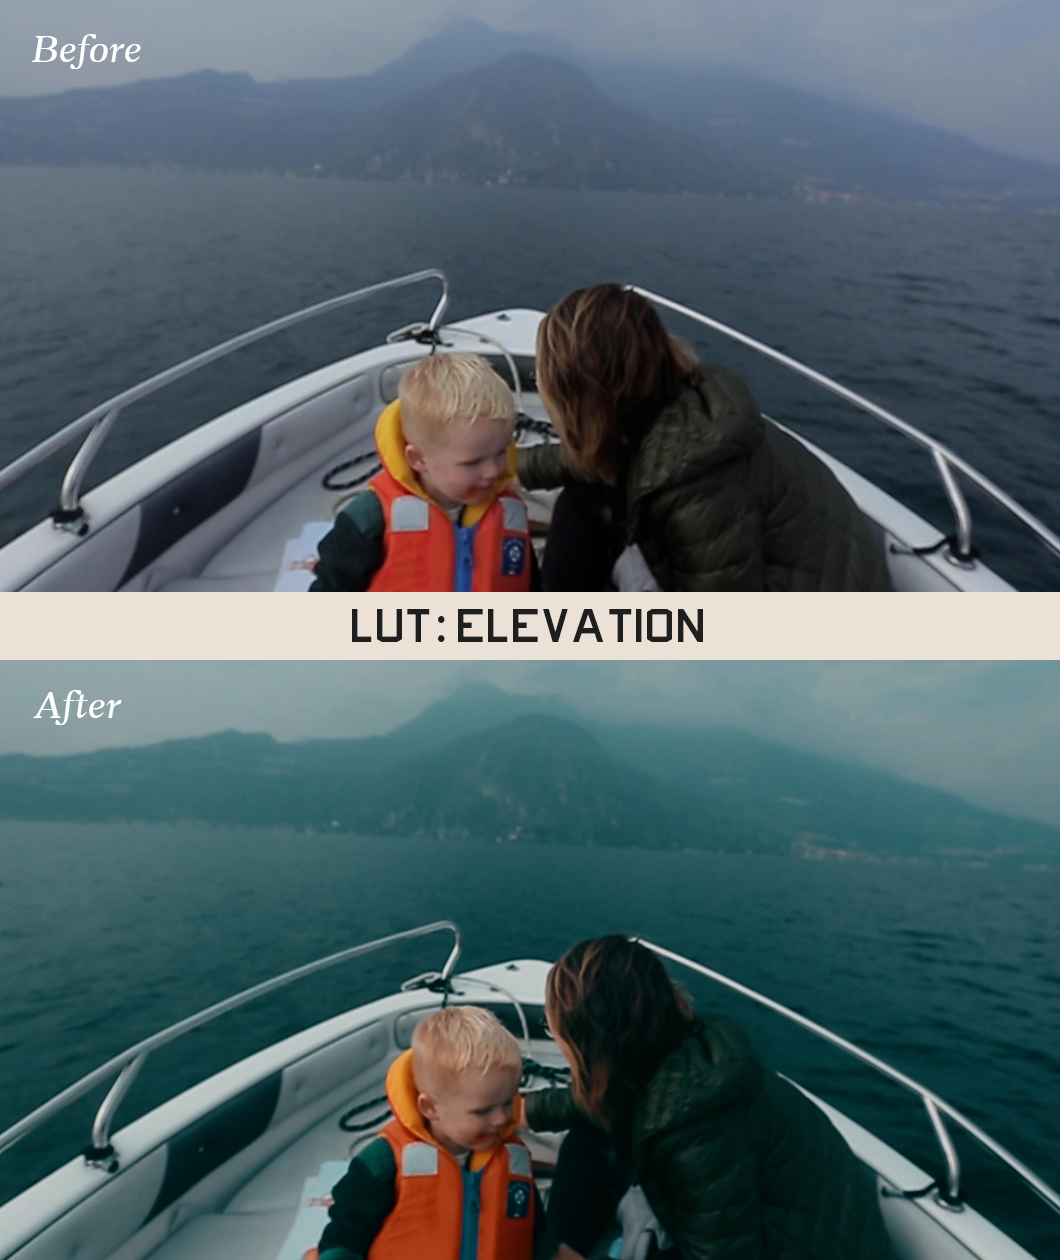 Two of the same photo of a child and adult on a boat. In betwen the photos is a bar that says "LUT: Elevation". The bottom "after" photo has warmer-toned colors compared to the top photo. By Iz & Johnny Harris